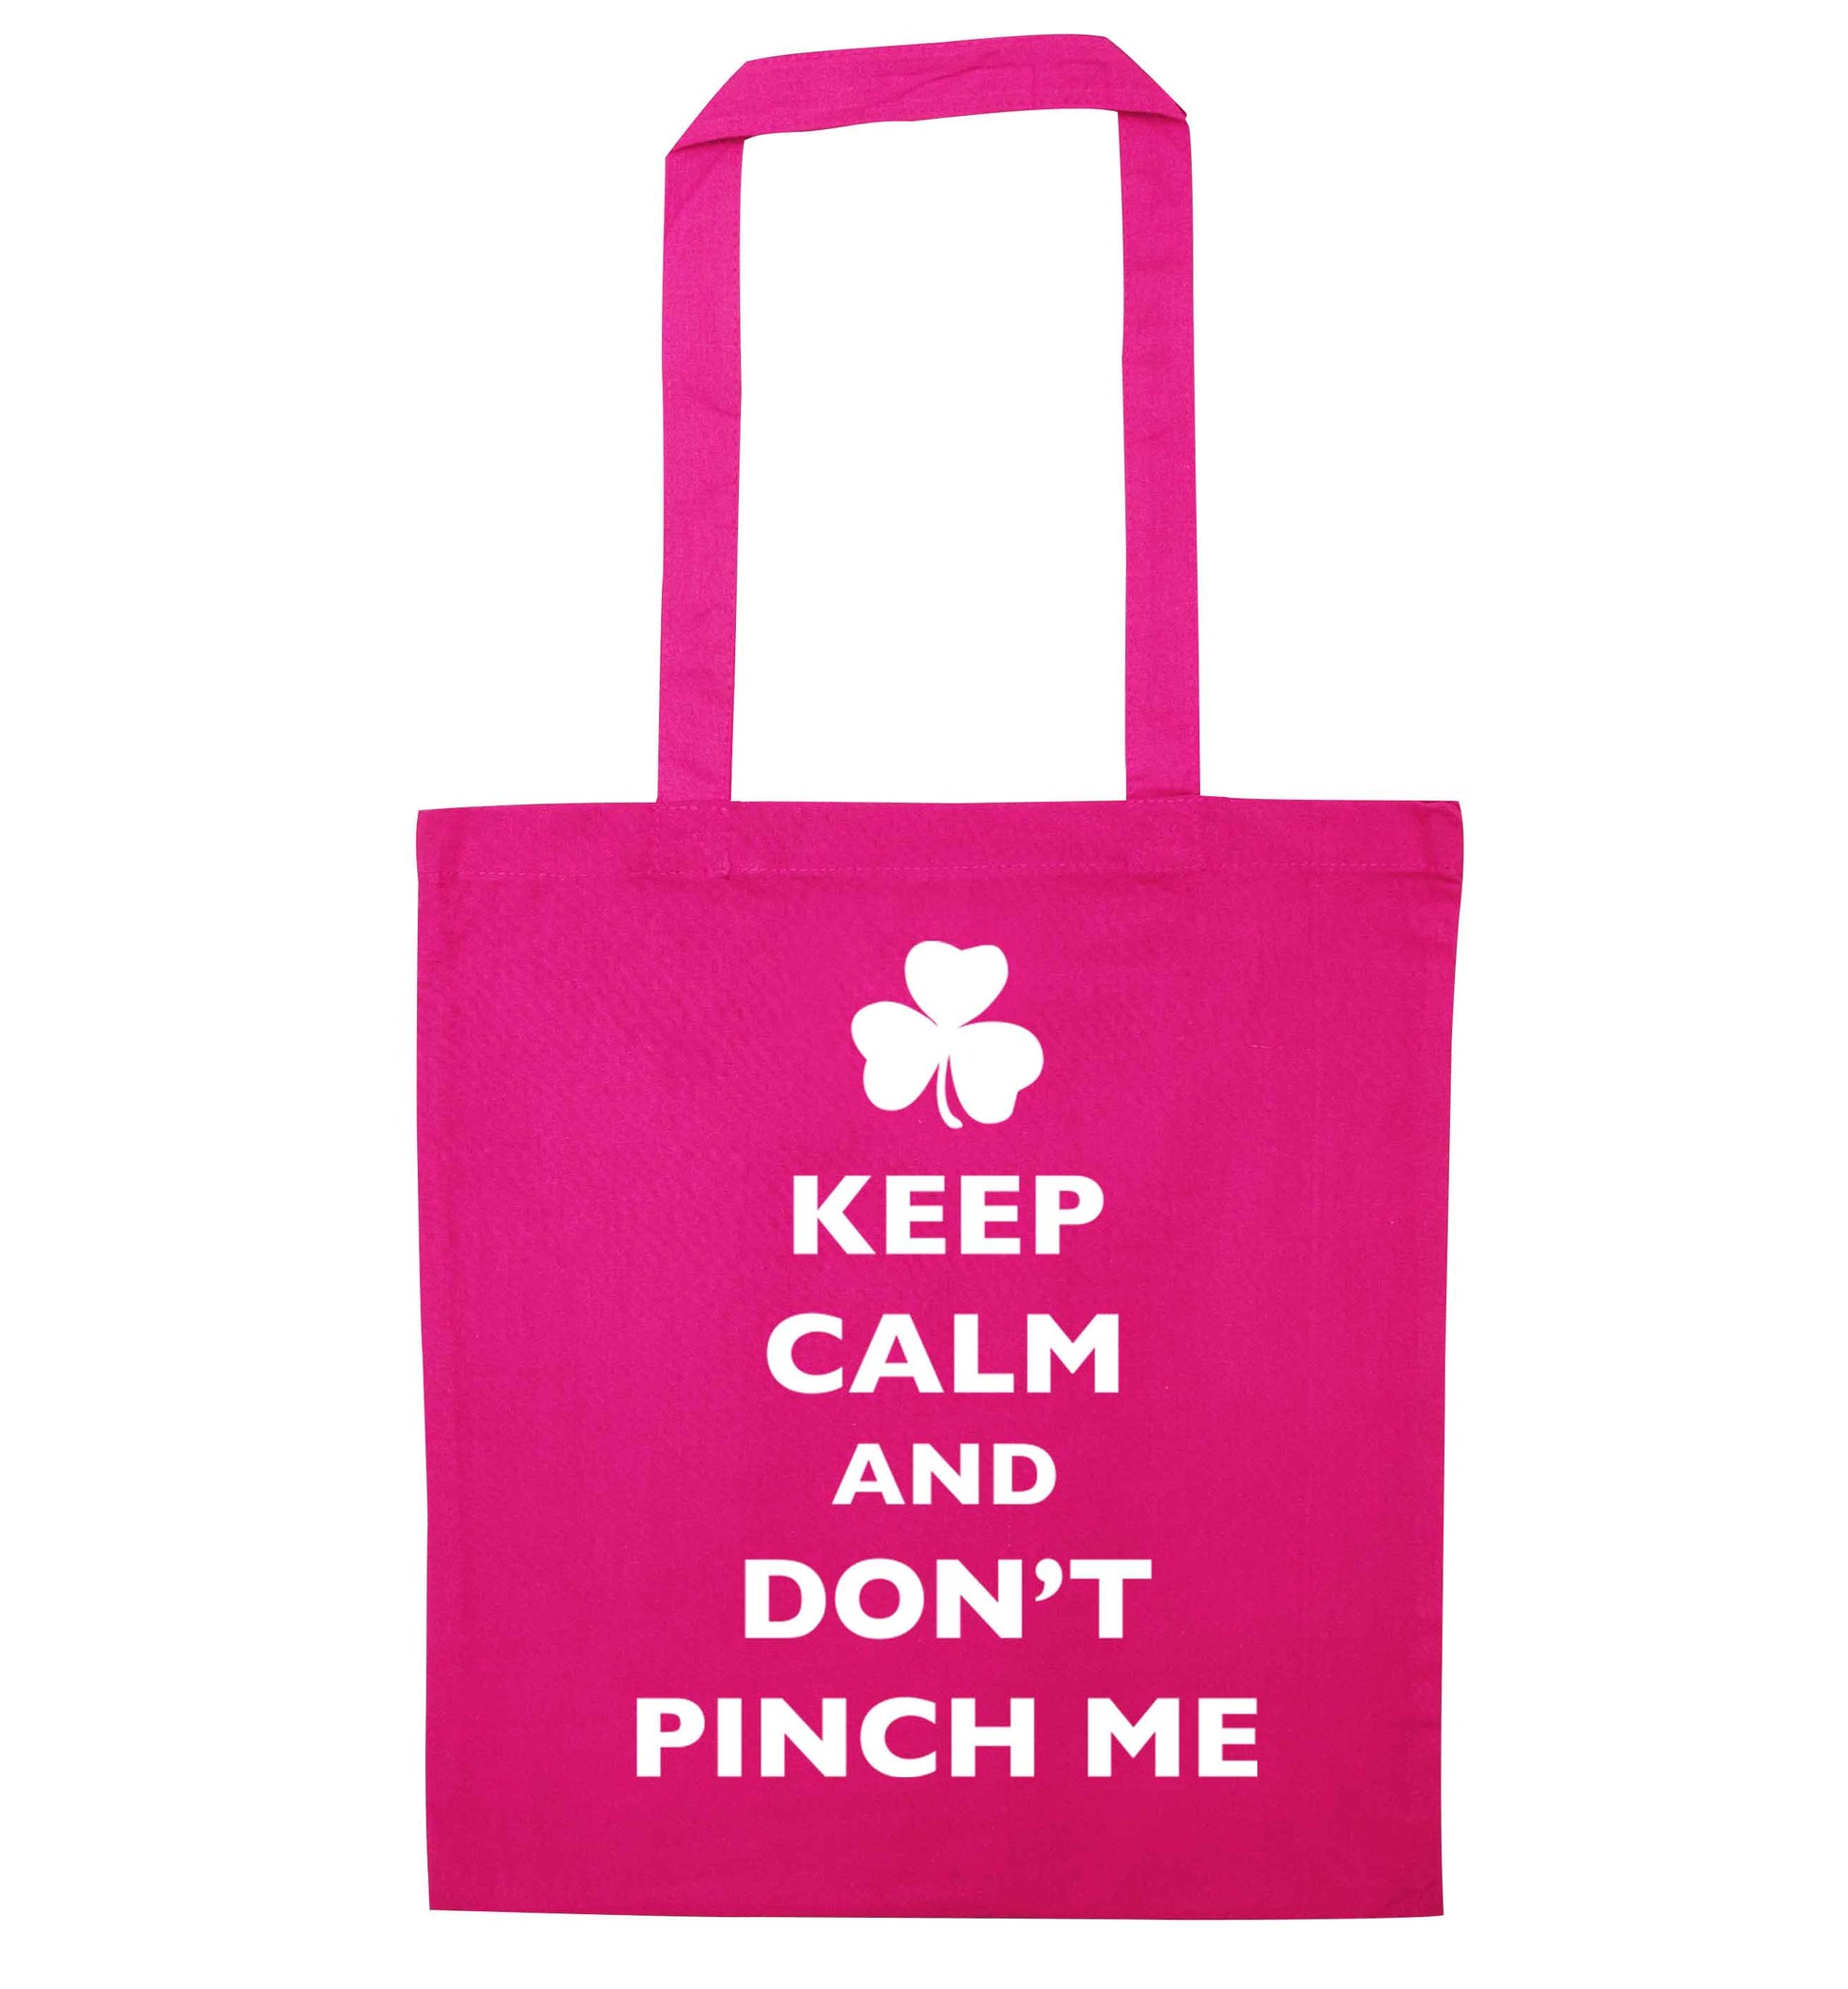 Keep calm and don't pinch me pink tote bag